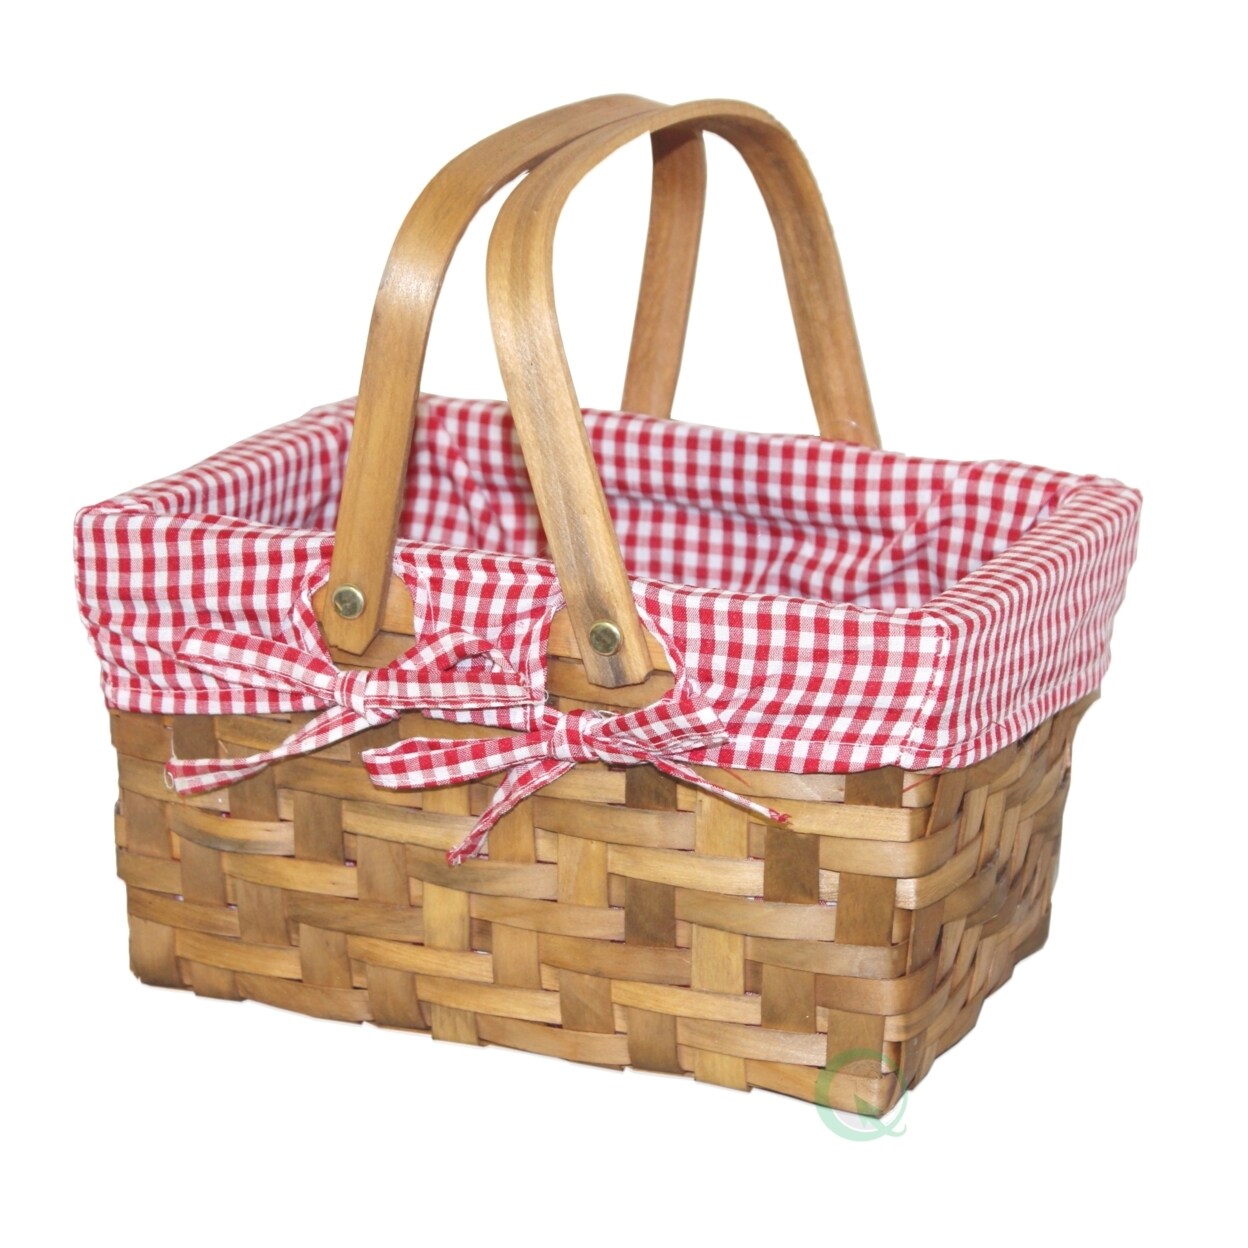 Wickerwise Small Rectangular Basket Lined with Gingham Lining Carrying Handles